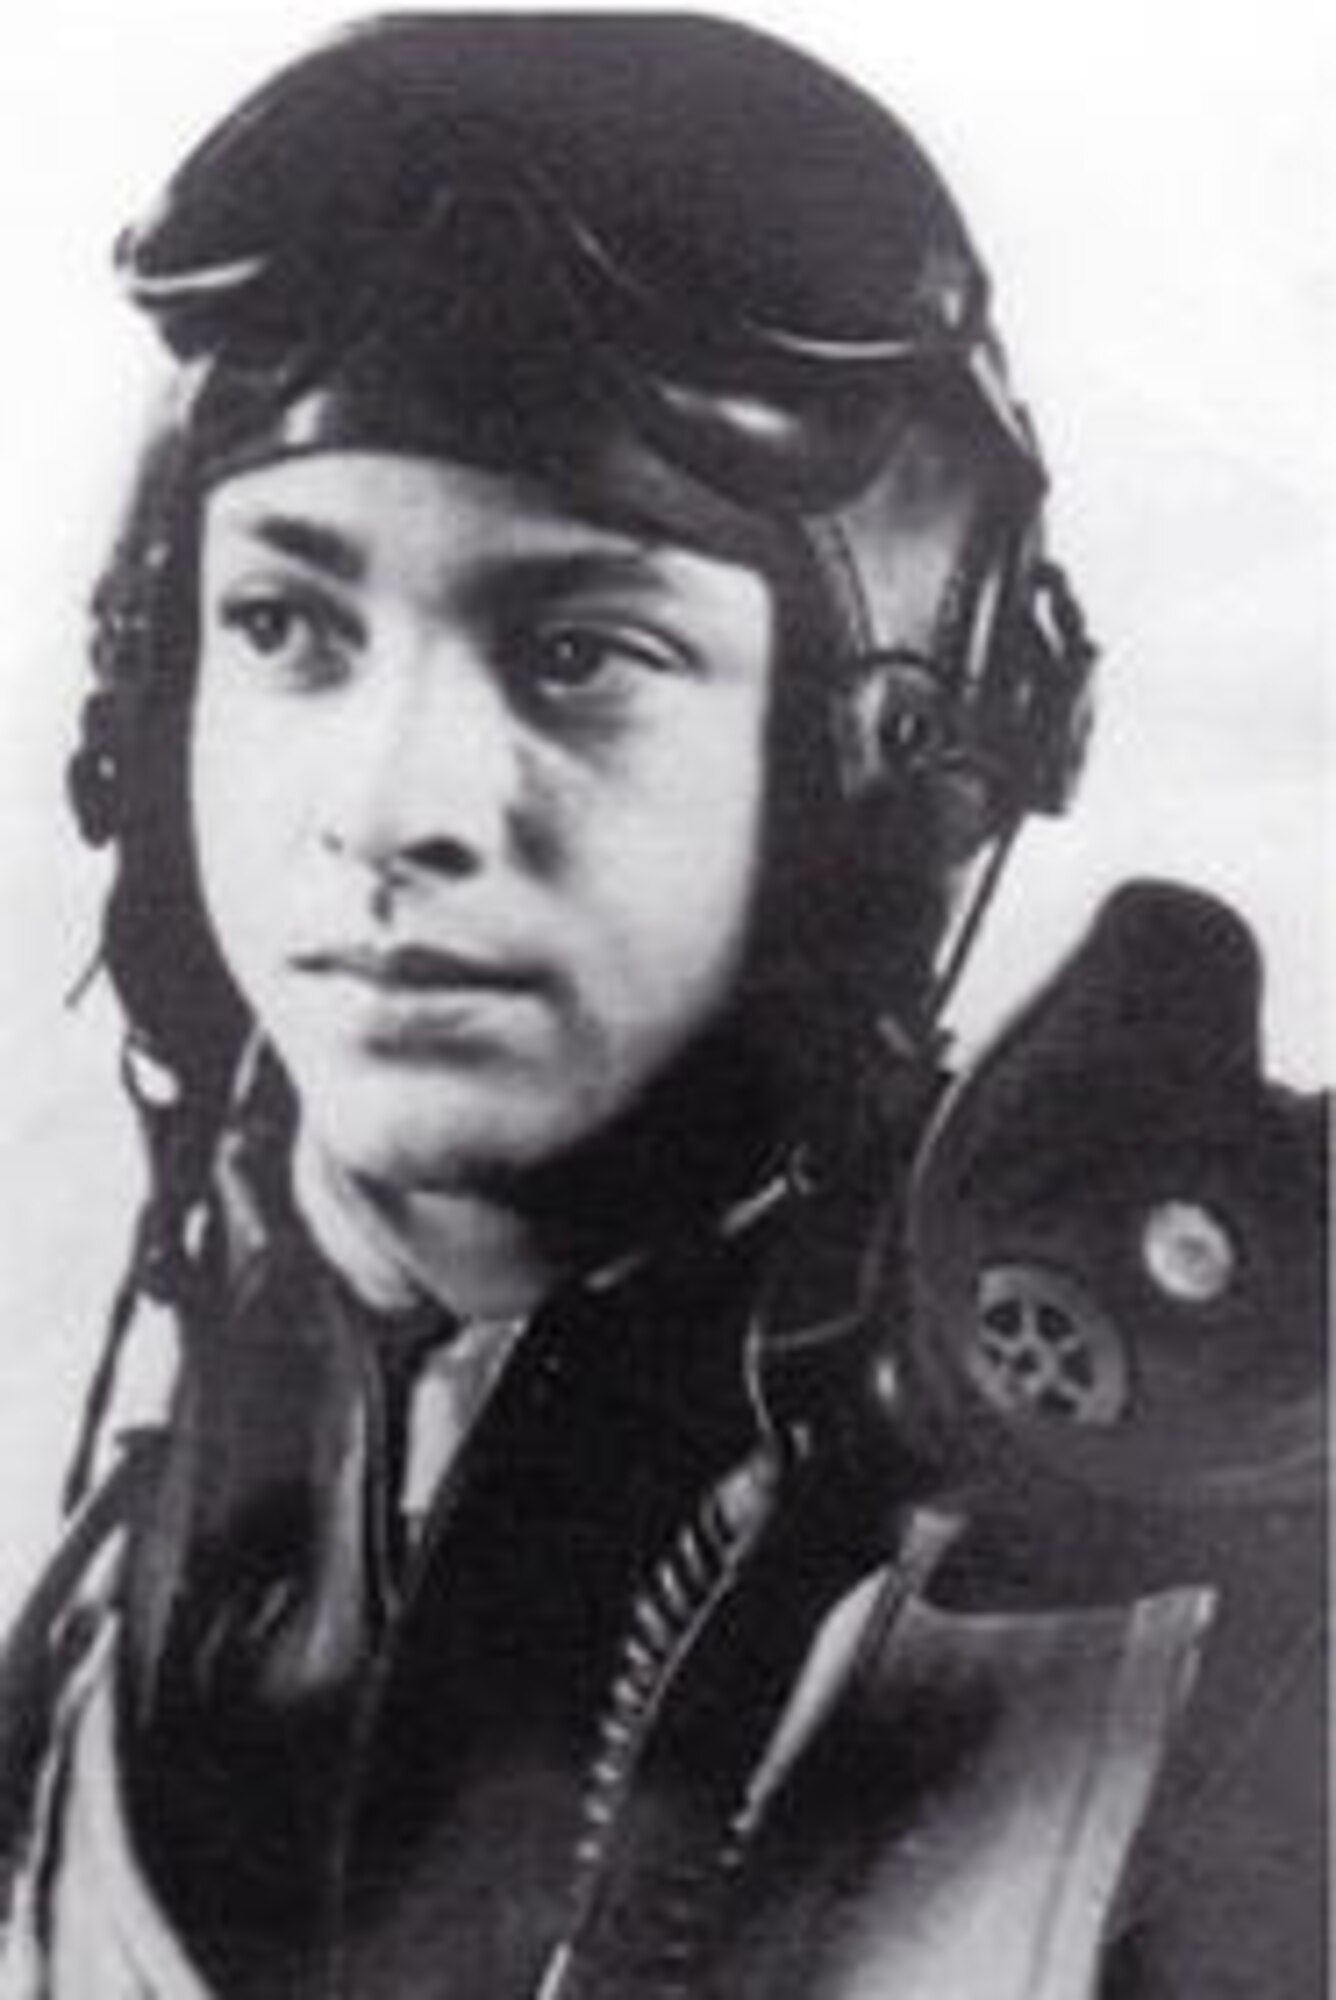 Retired Lt. Col. George E. Hardy is pictured here during his time as a Tuskegee Airman in the 1940s. He joined the U.S. Army Air Corps at the age of 18 in July 1943, and began flight training at the Tuskegee Army Air Field in Tuskegee, Ala. later that same year. (Courtesy Photo)
